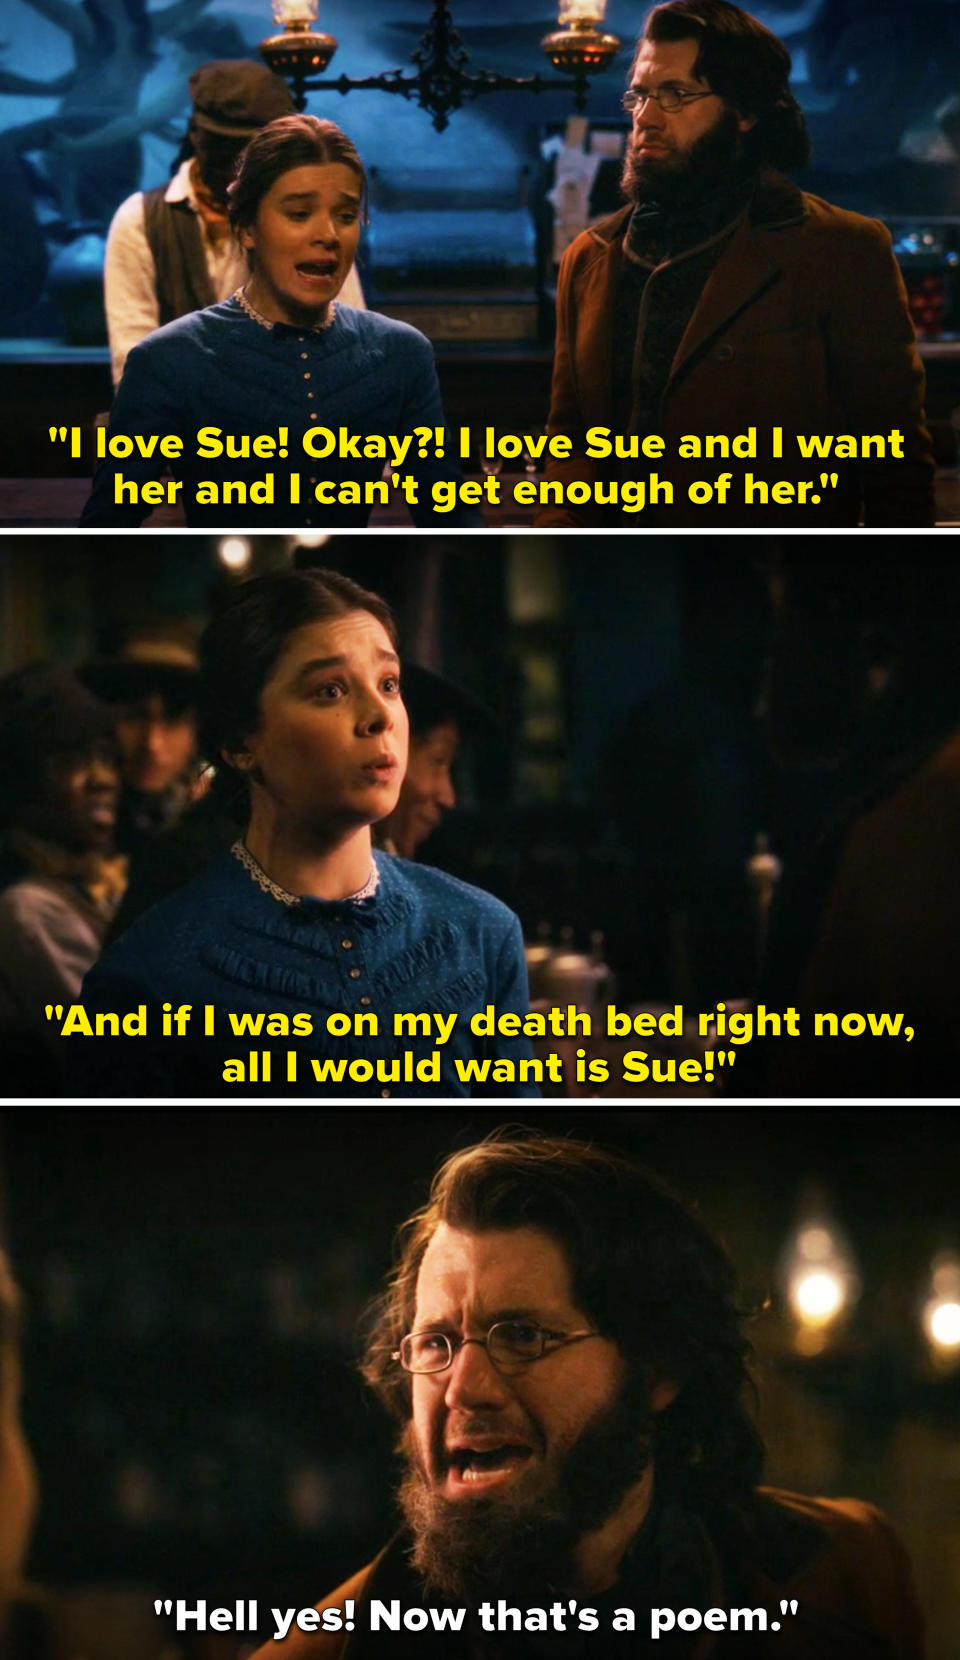 Emily screaming, "I love Sue. And if I was on my death bed right now, all I would want is Sue"